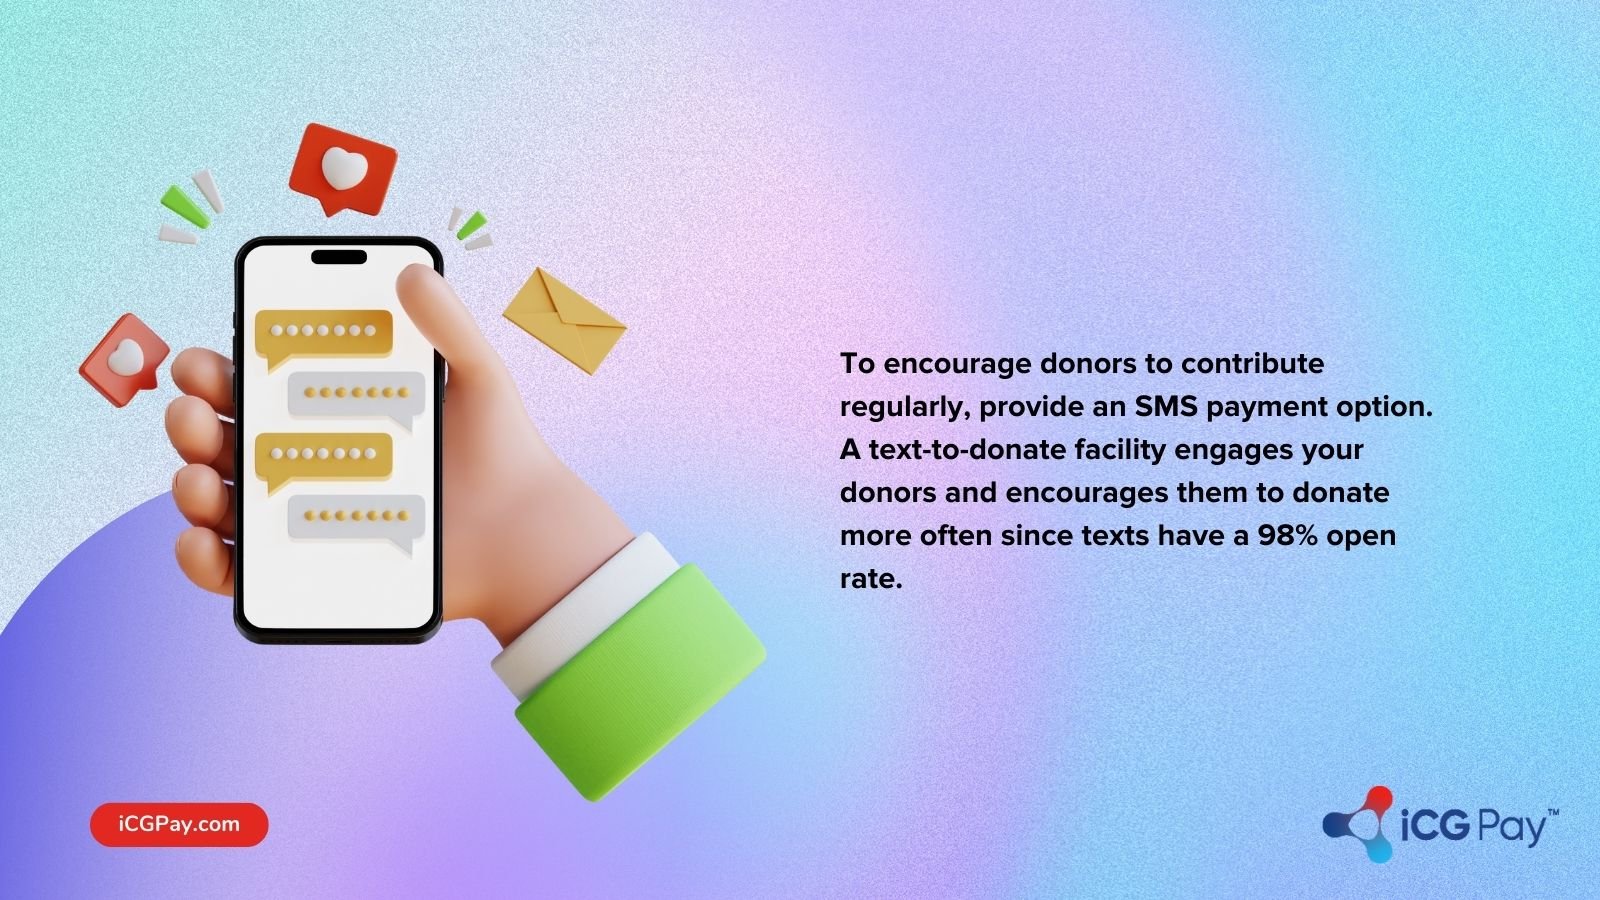 SMS payments